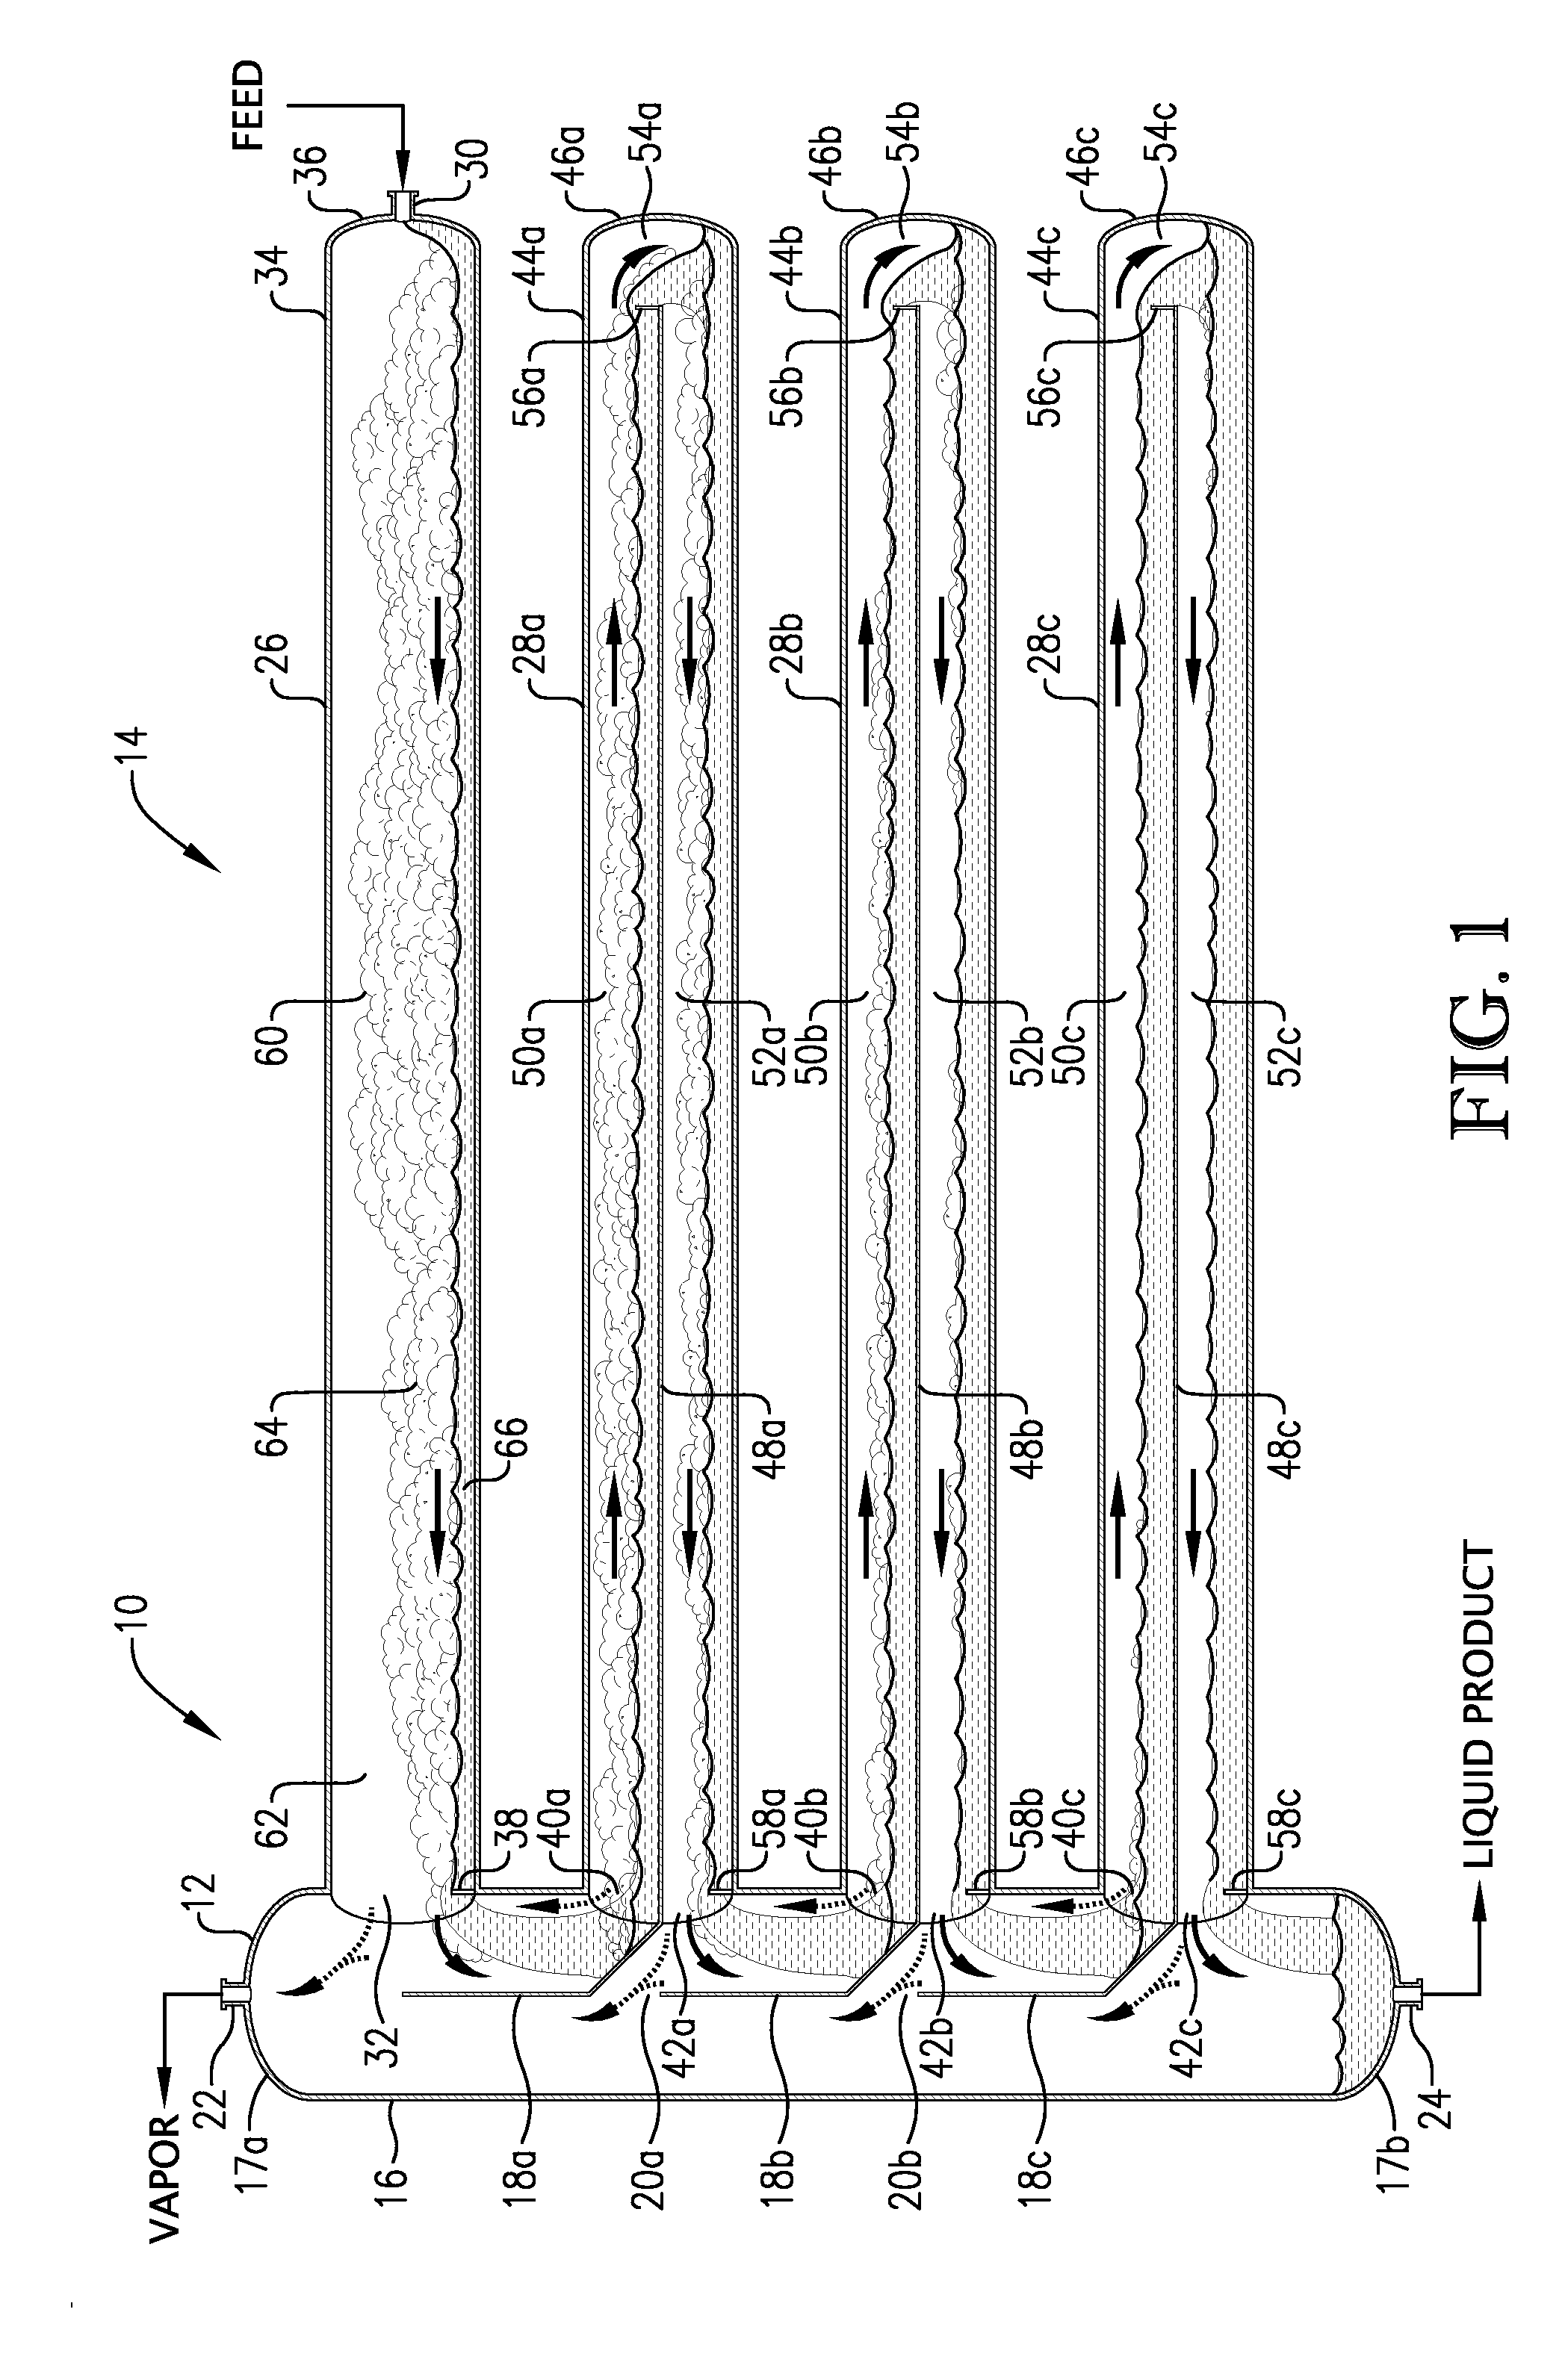 Multi-level tubular reactor with vertically spaced segments